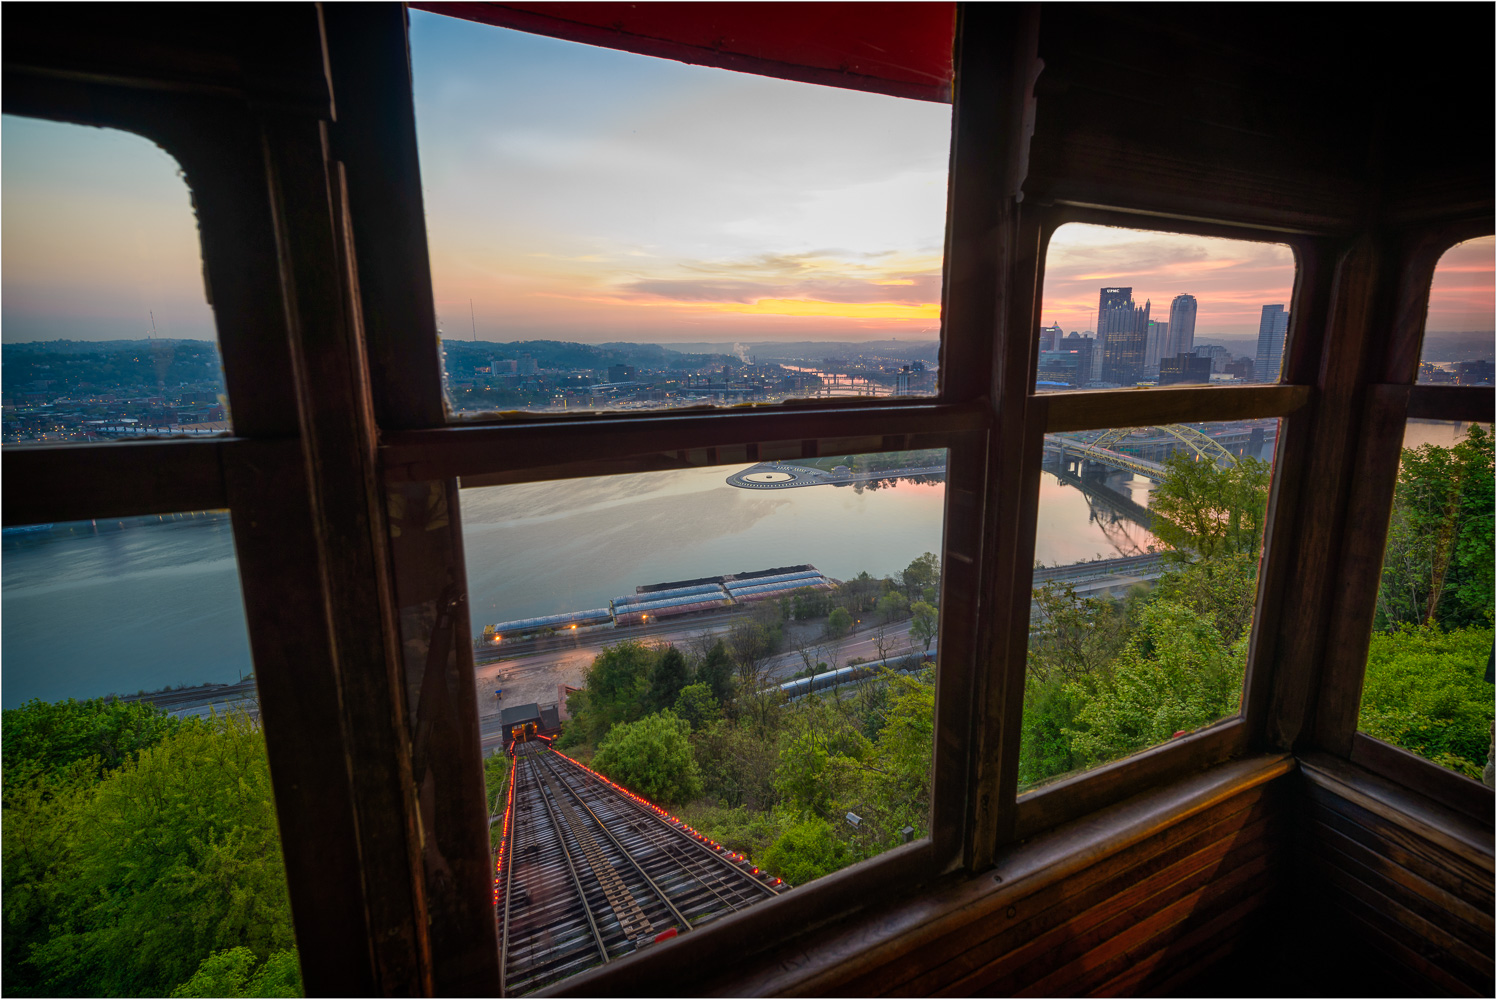 Sunrise-From-The-Duquesne-Incline.jpg